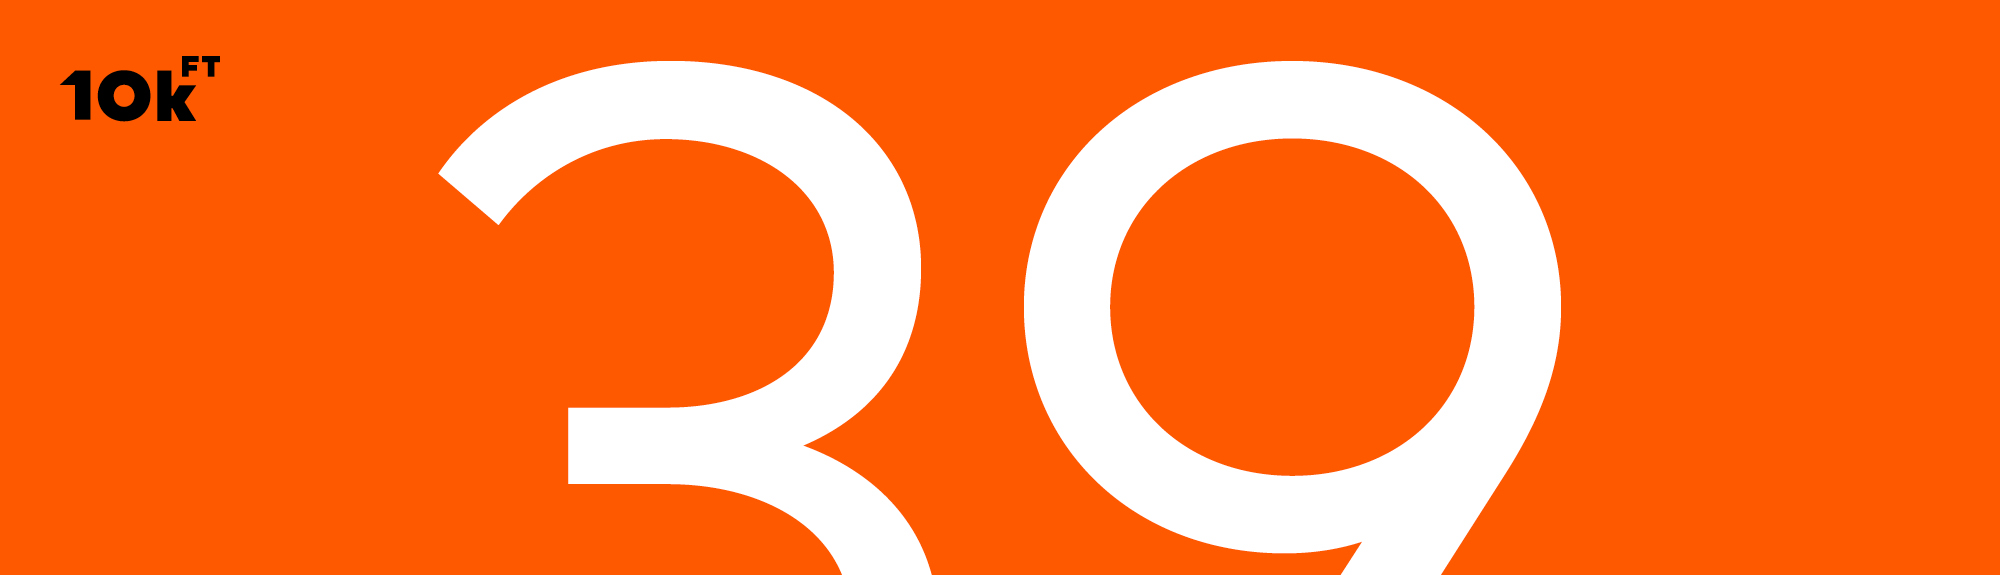 Orange image with text that reads "10k ft" and "39 ".